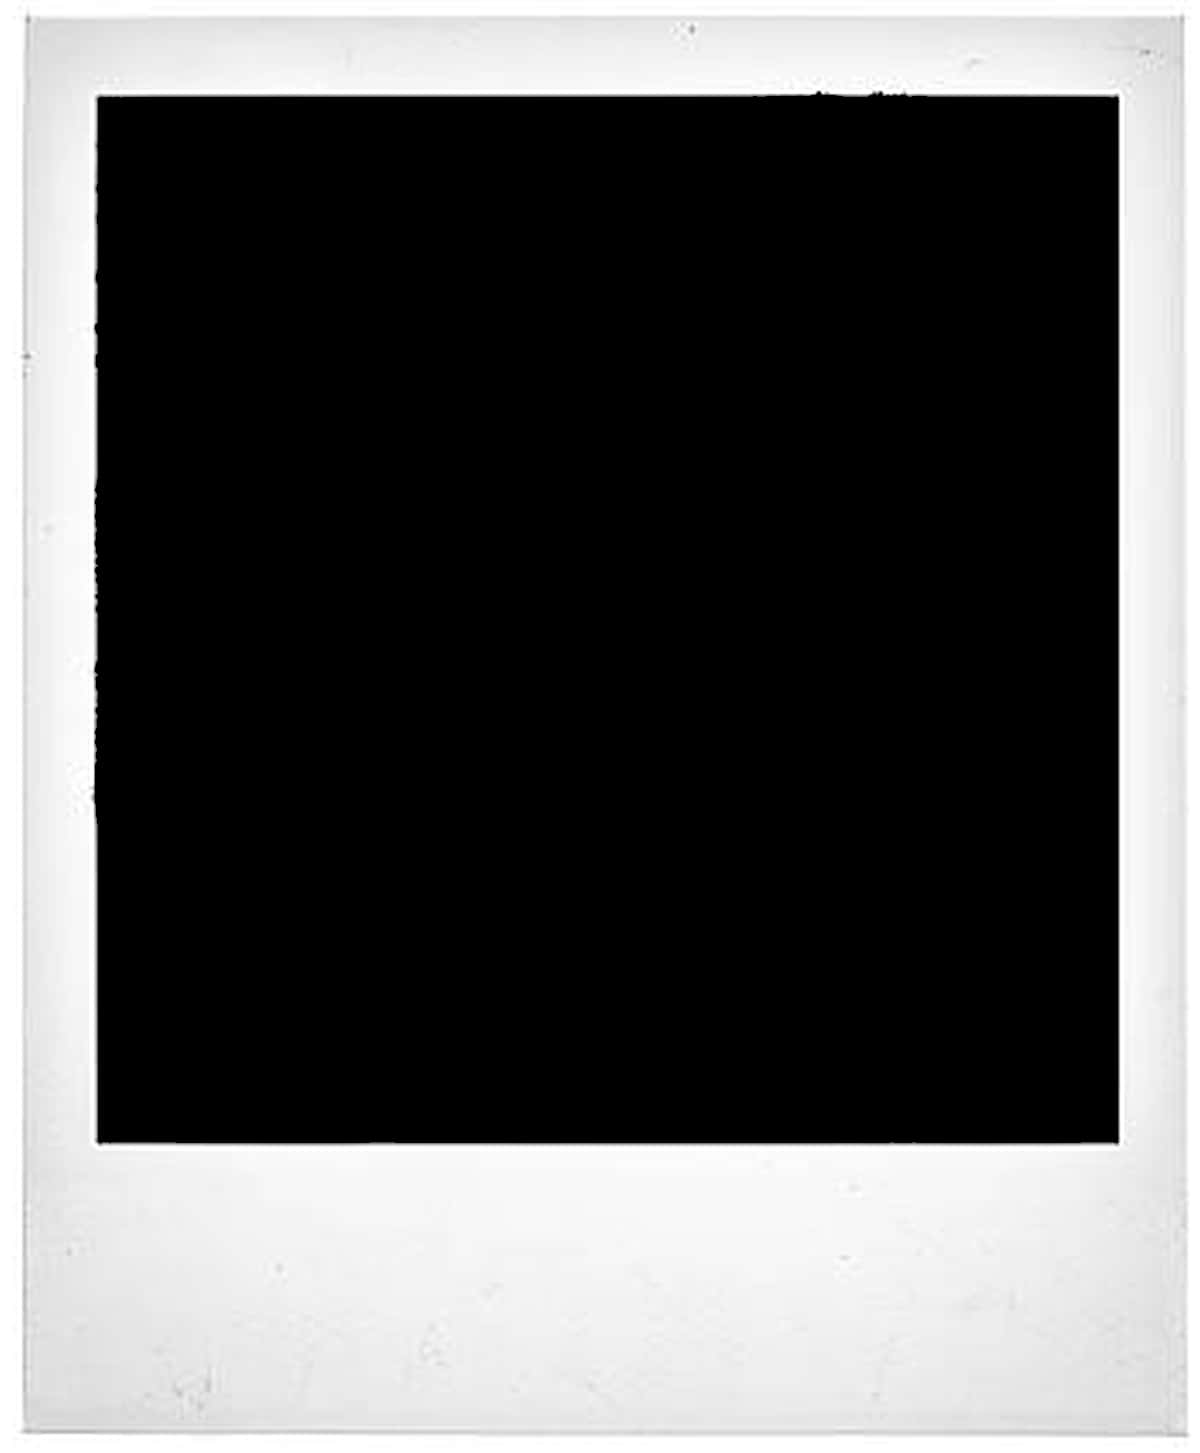 A Polaroid Photo With A Black Background